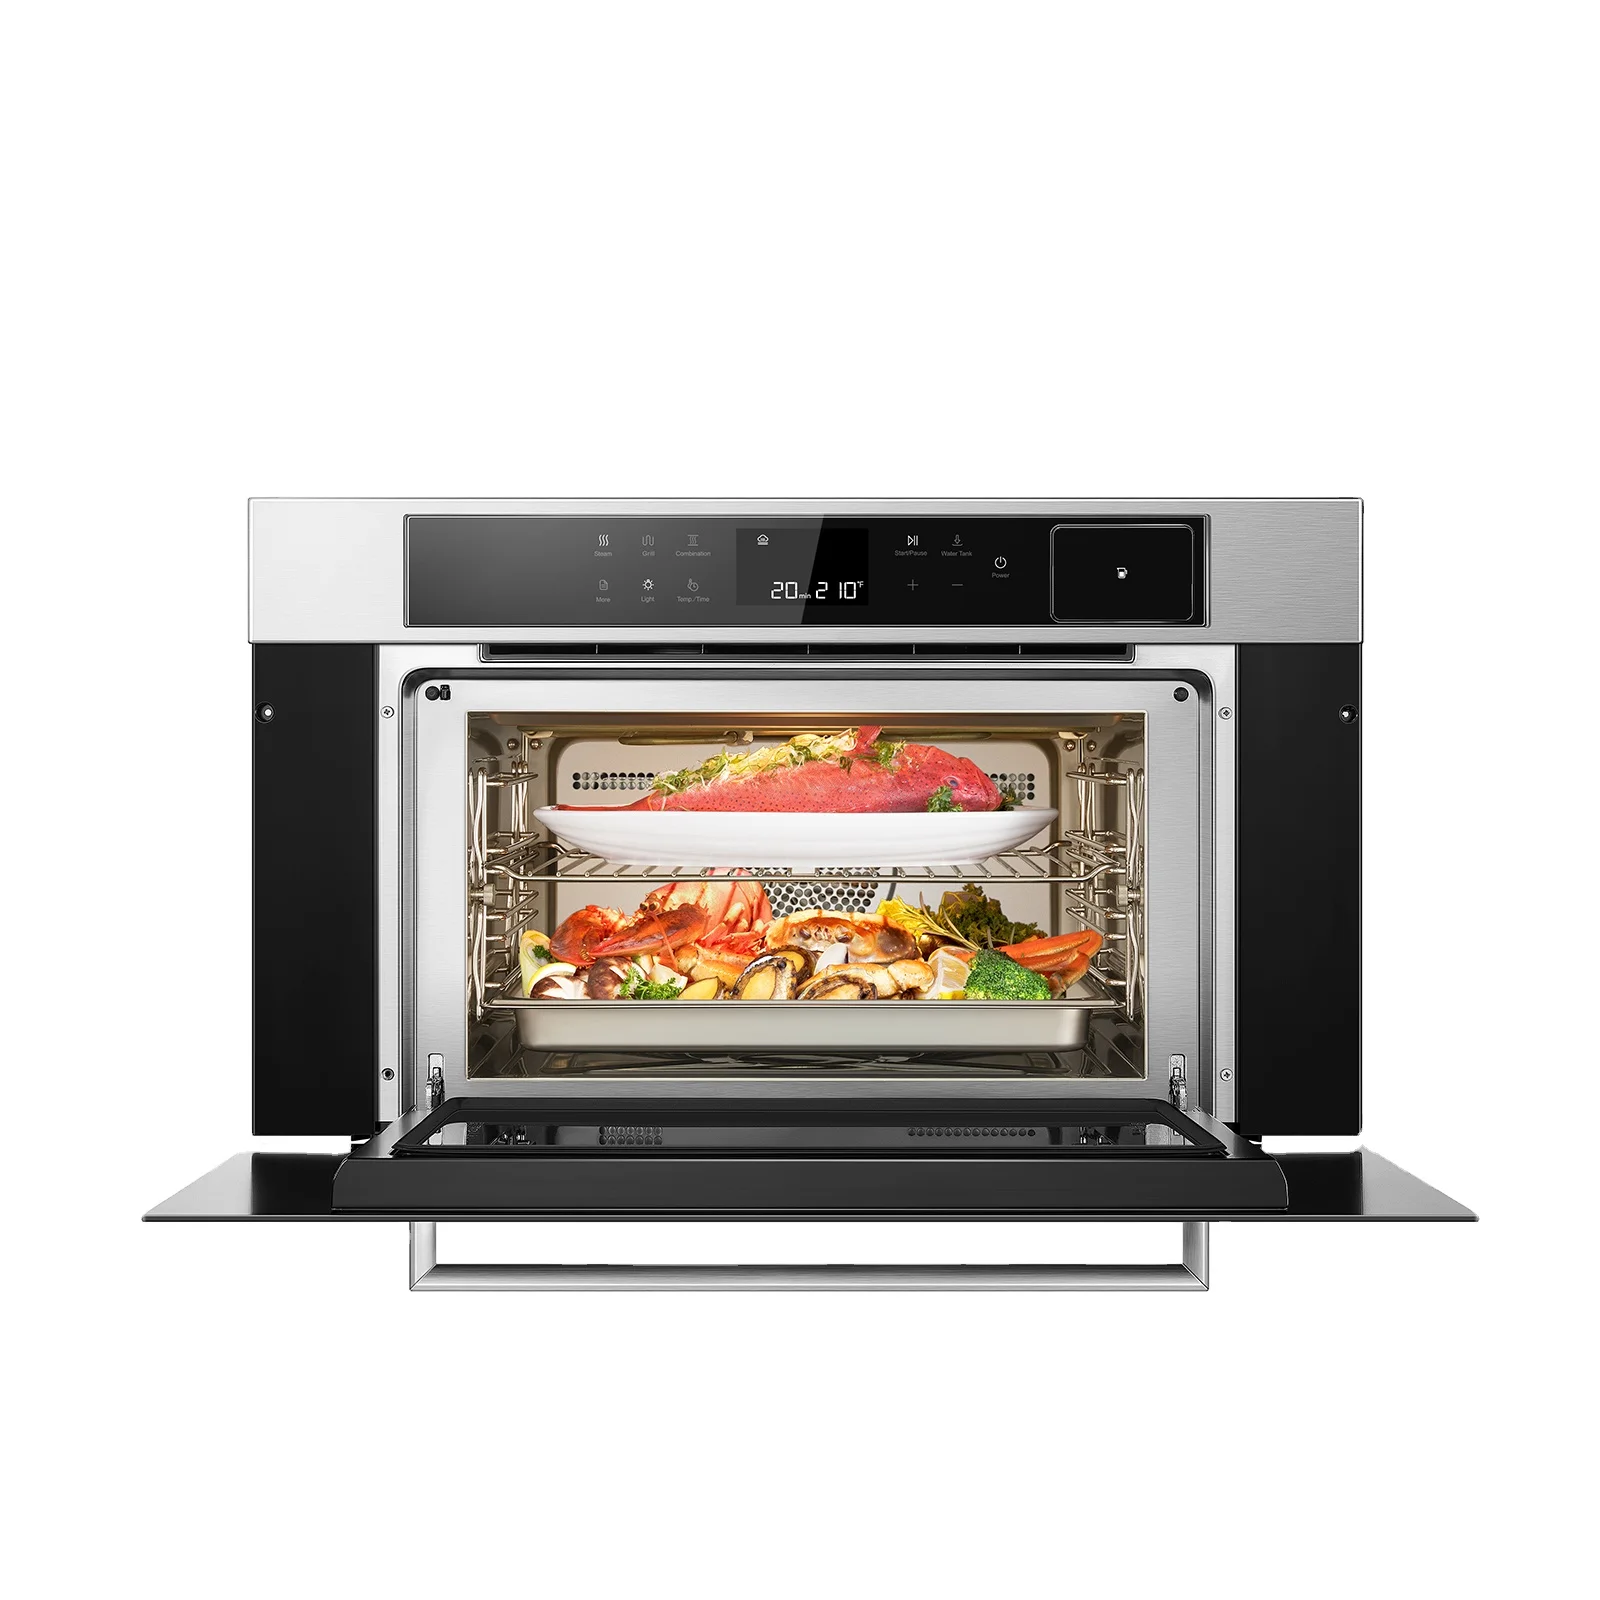 Electric ovens with steam фото 13